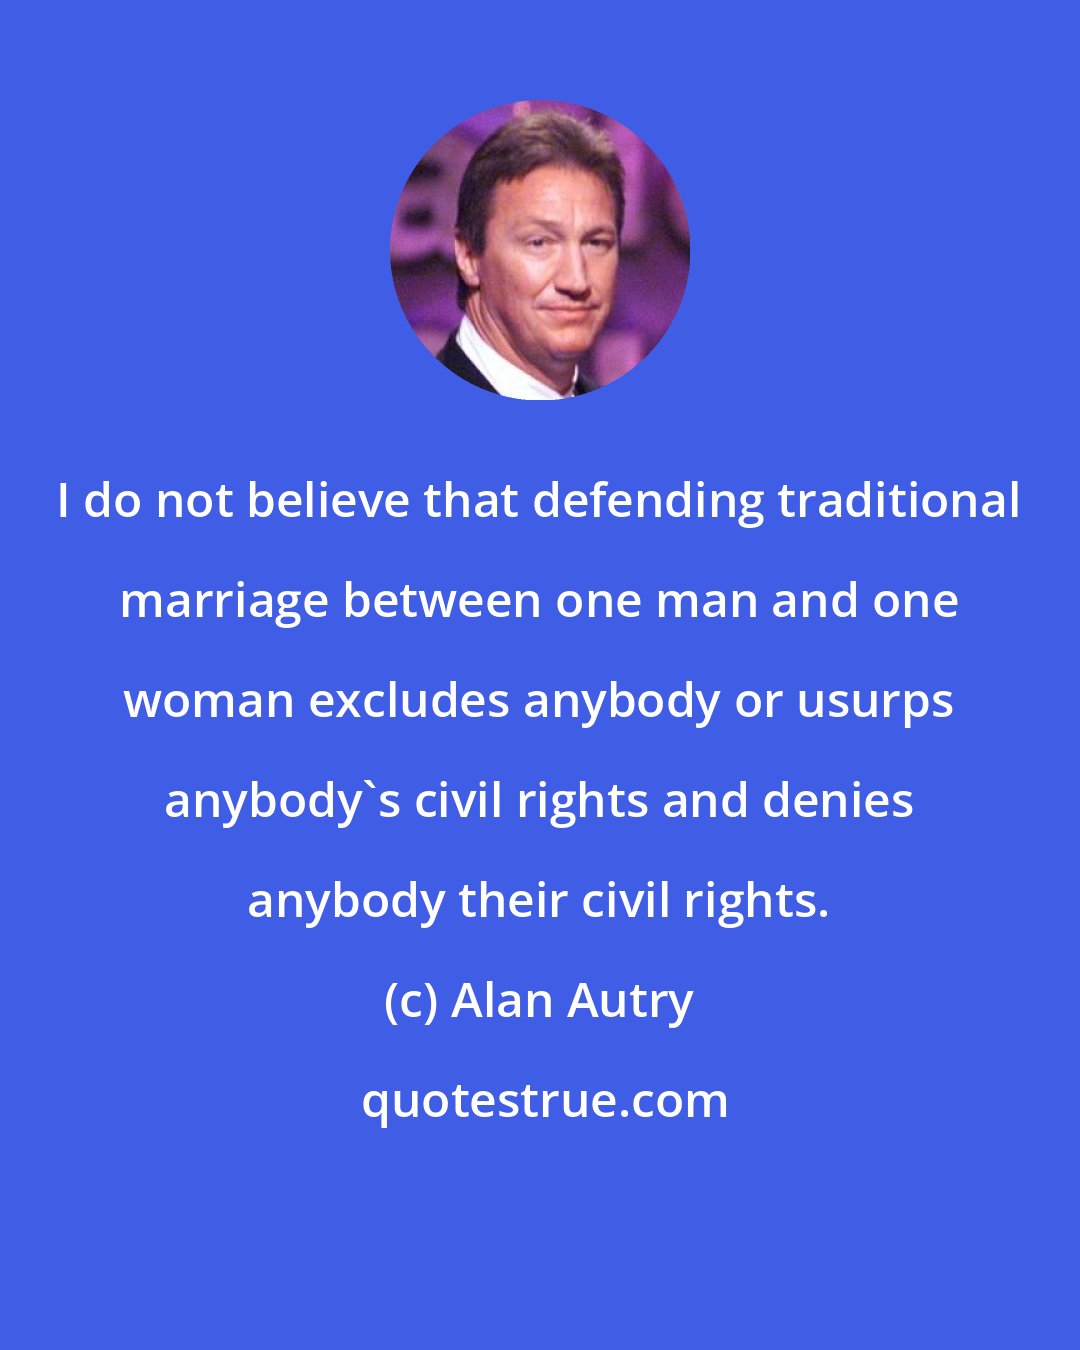 Alan Autry: I do not believe that defending traditional marriage between one man and one woman excludes anybody or usurps anybody's civil rights and denies anybody their civil rights.